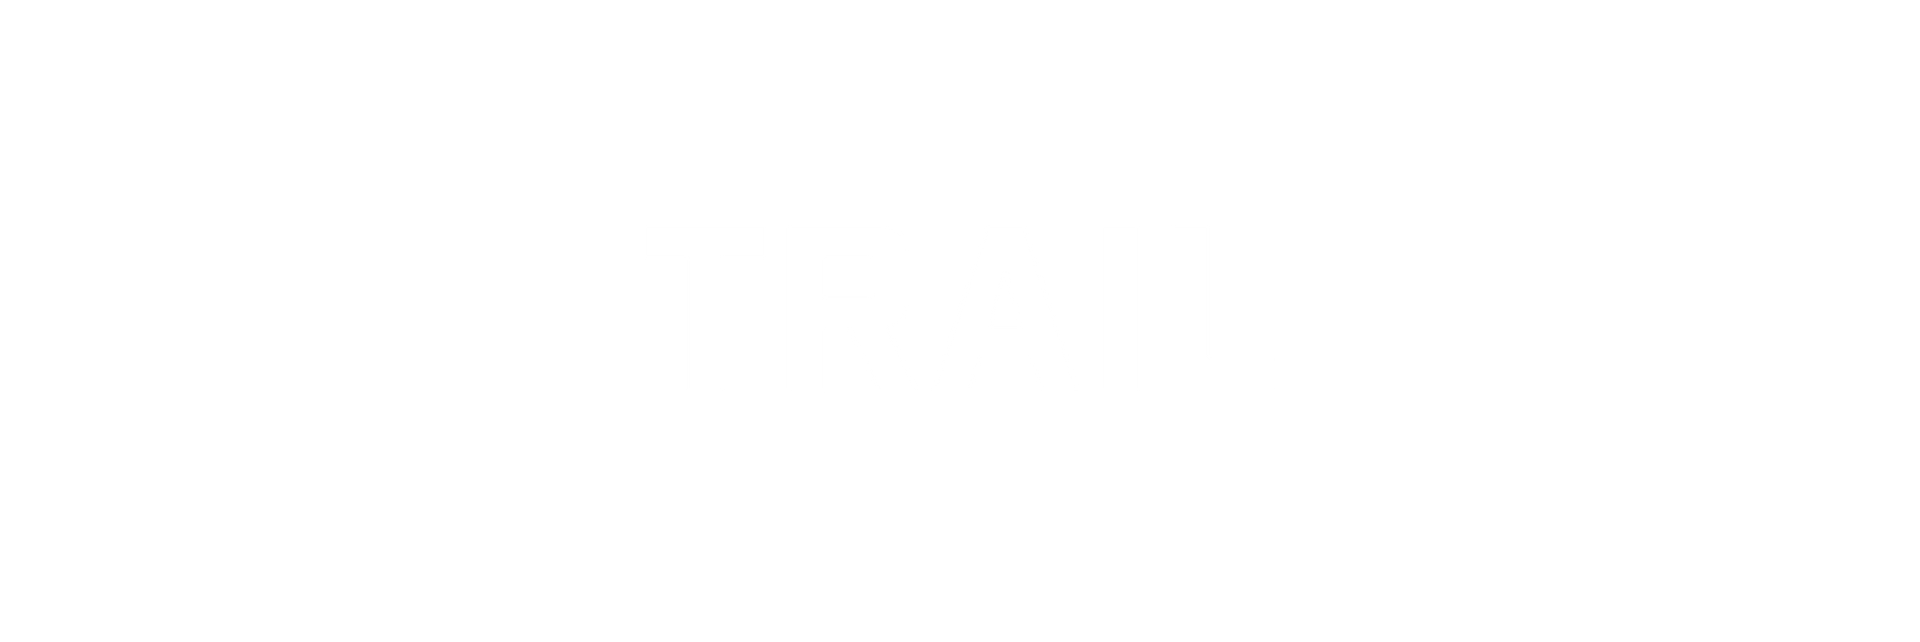 Trail  Header Image Text Overlay